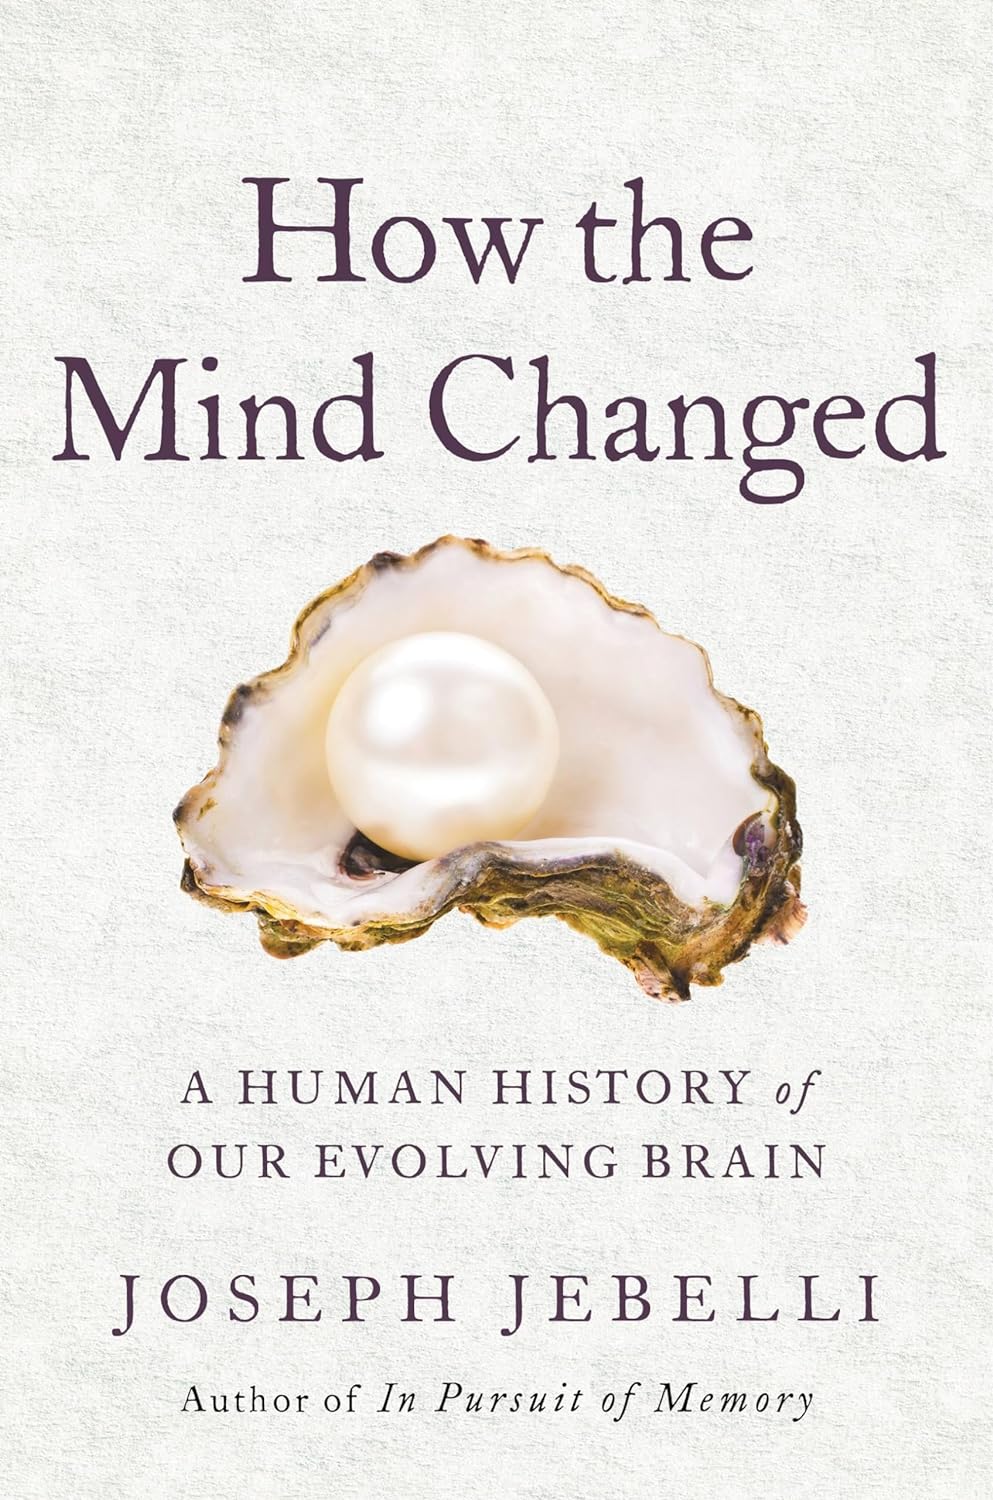 A Brain Like No Other: A Human History of Our Evolving Brain